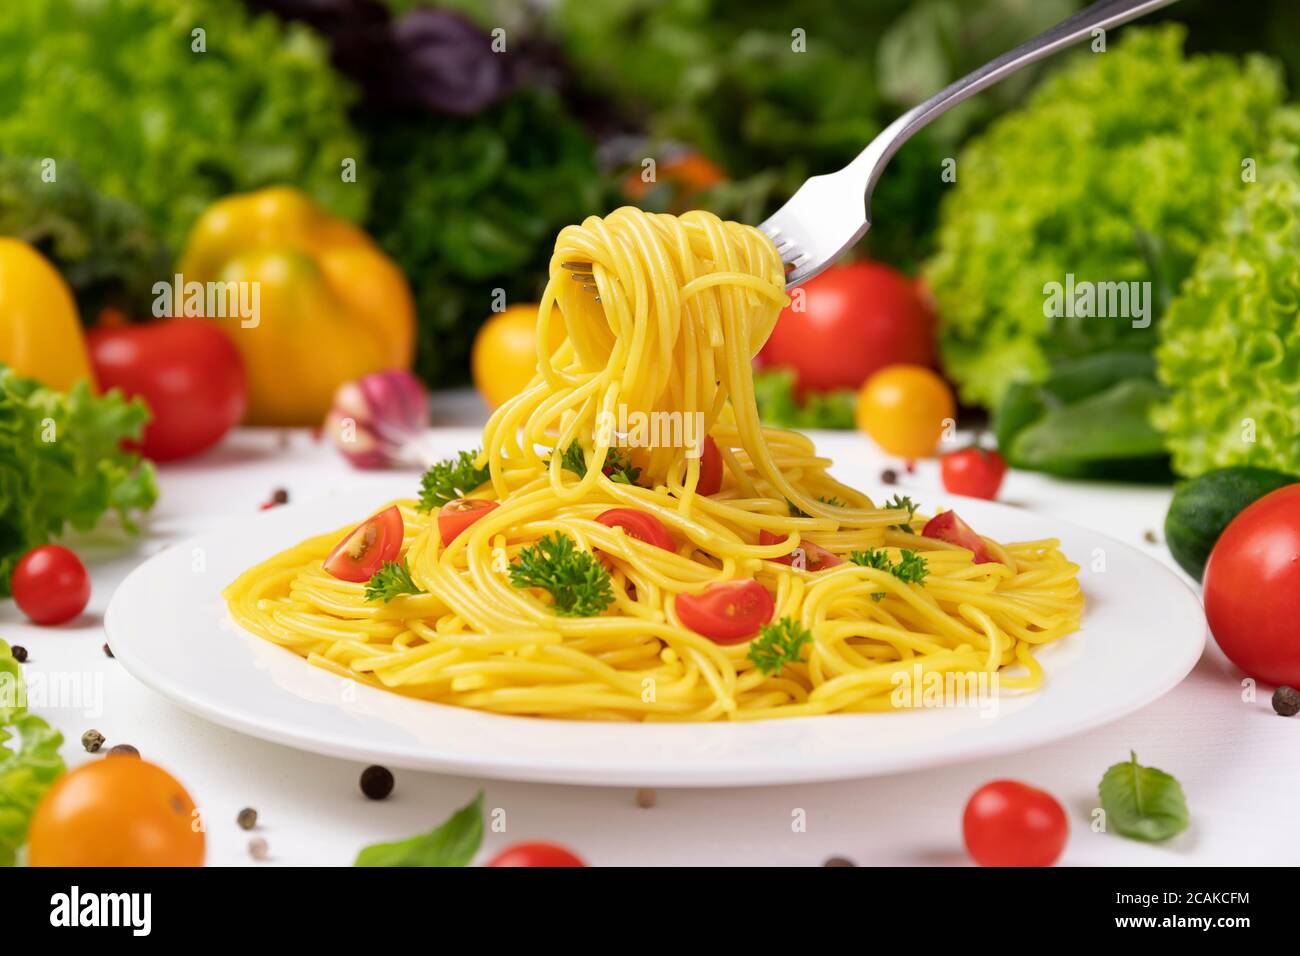 Plate of italian pasta, spaghetti on fork with tomatoes and basil Stock Photo